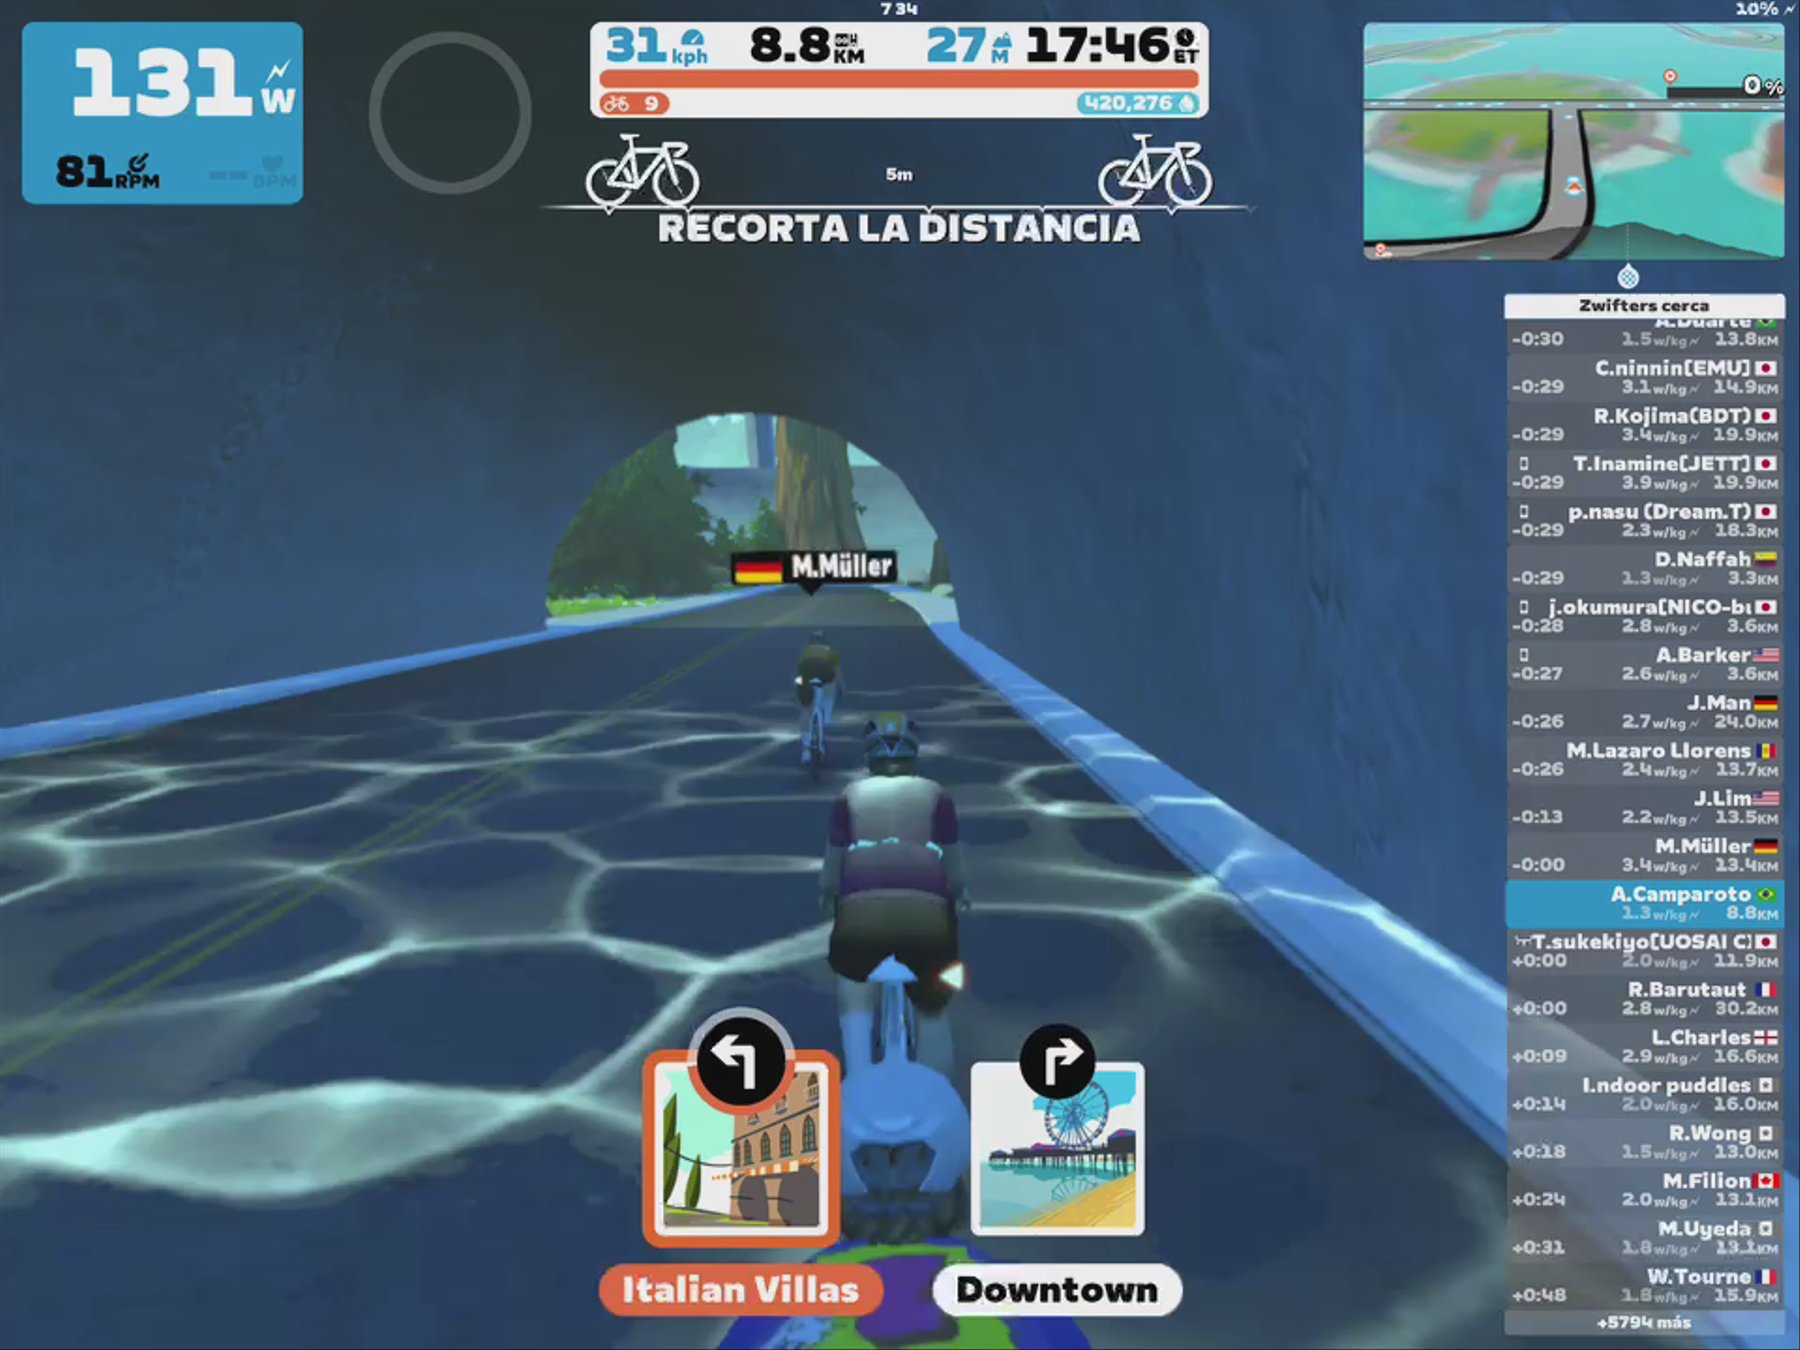 Zwift - Pacer Group Ride: Watopia's Waistband in Watopia with Yumi